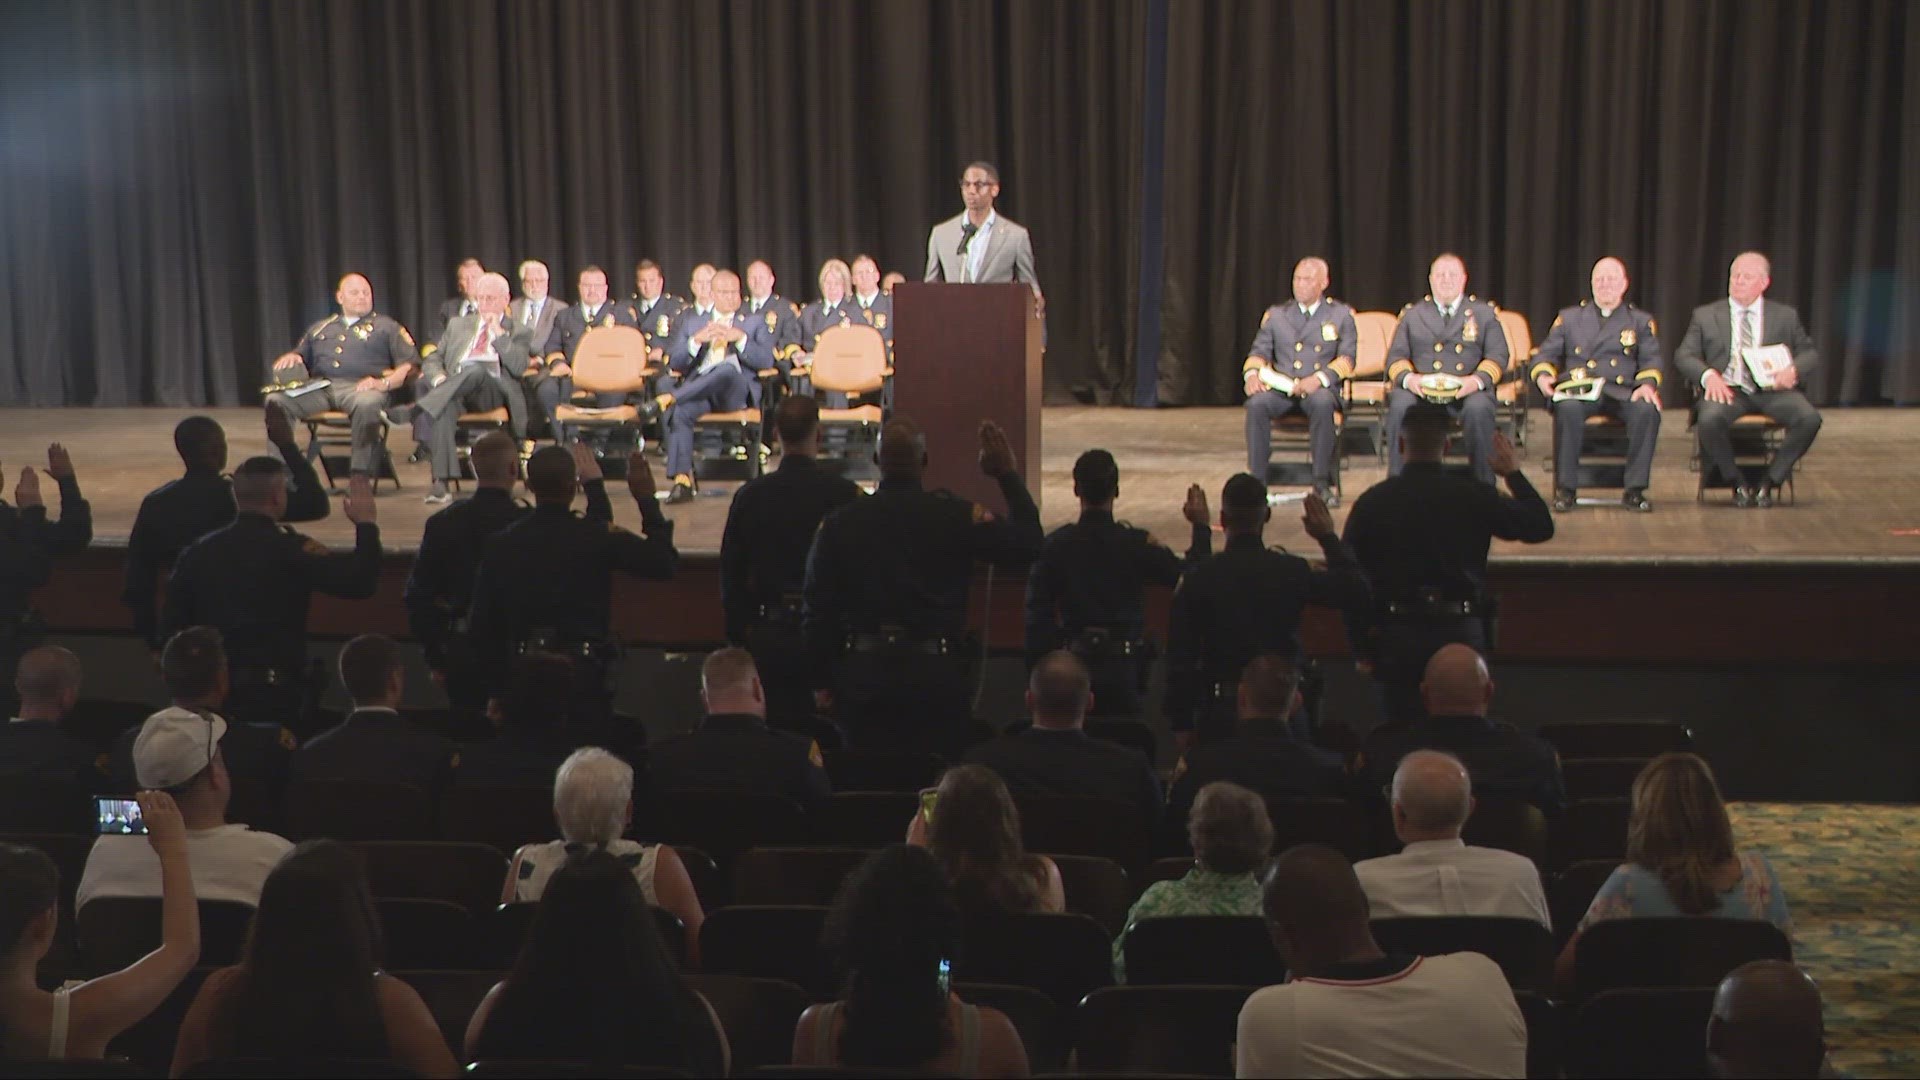 Eleven new officers graduated from the Cleveland Police Academy on Friday, a number that pales in comparison to what the department needs.